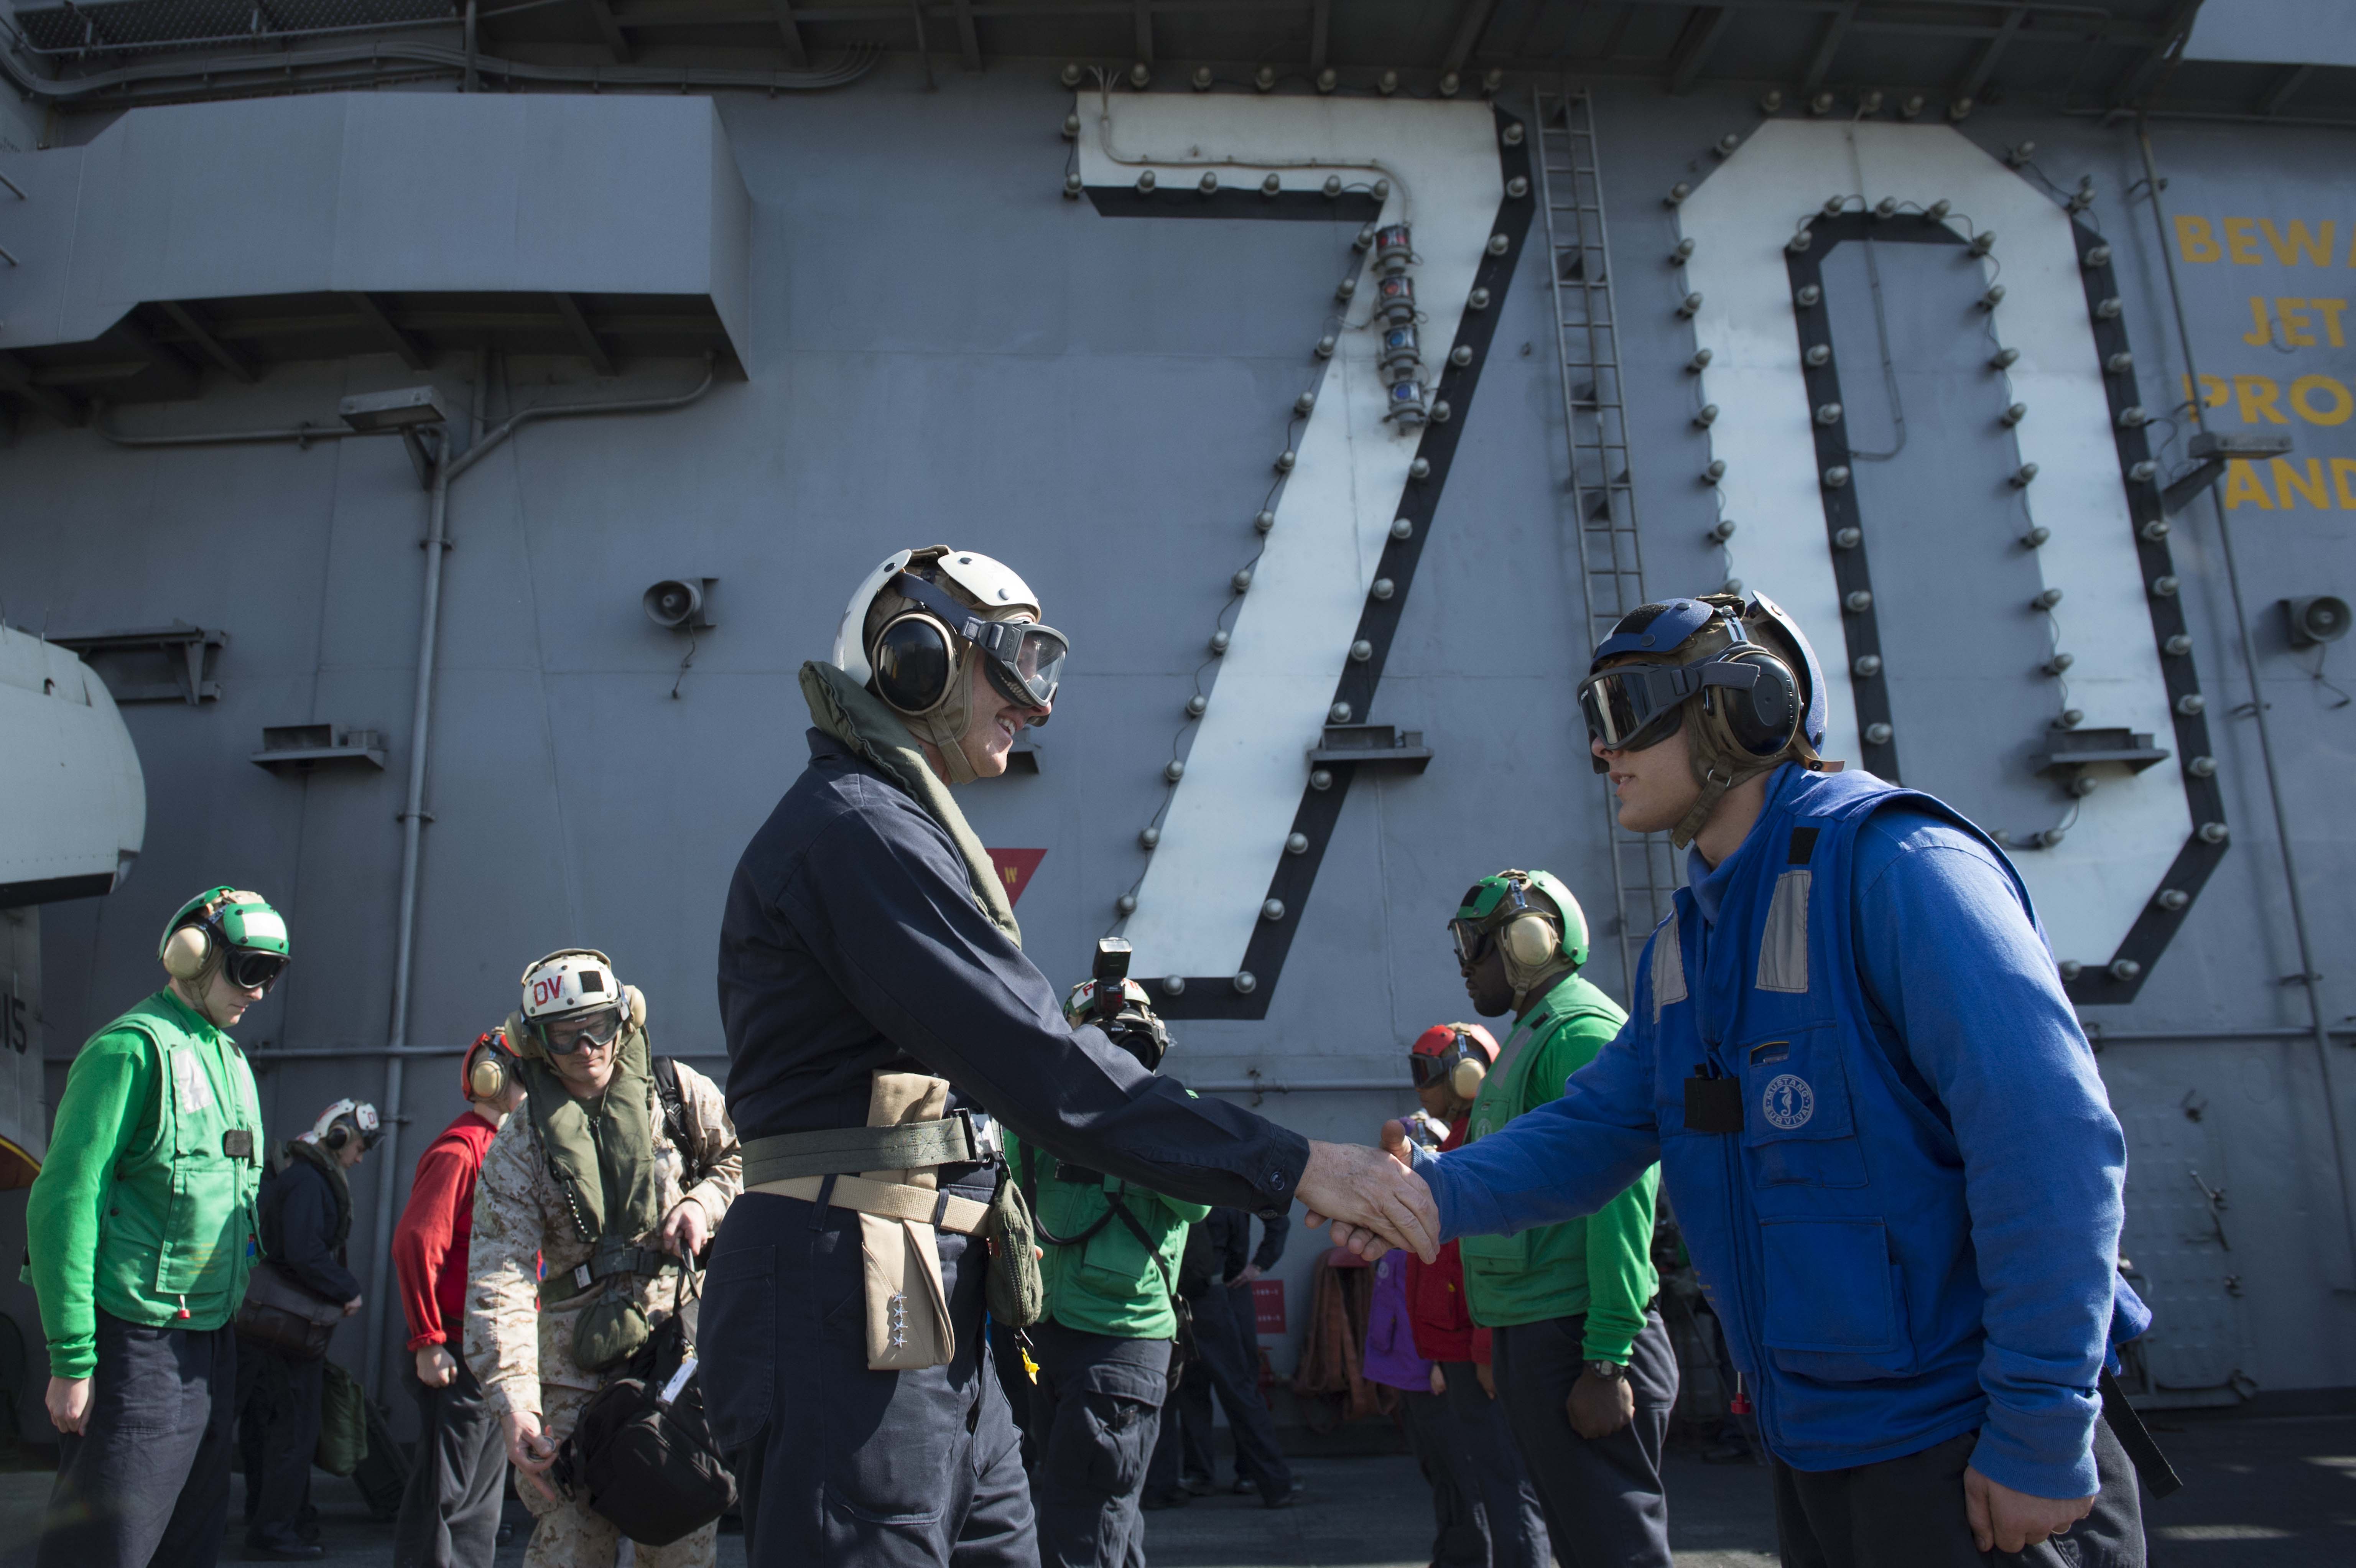 Chief of Naval Operations (CNO) Adm.  Jonathan Greenert is welcomed aboard the aircraft carrier USS Carl Vinson (CVN 70) on November 27, 2014. US Navy photo